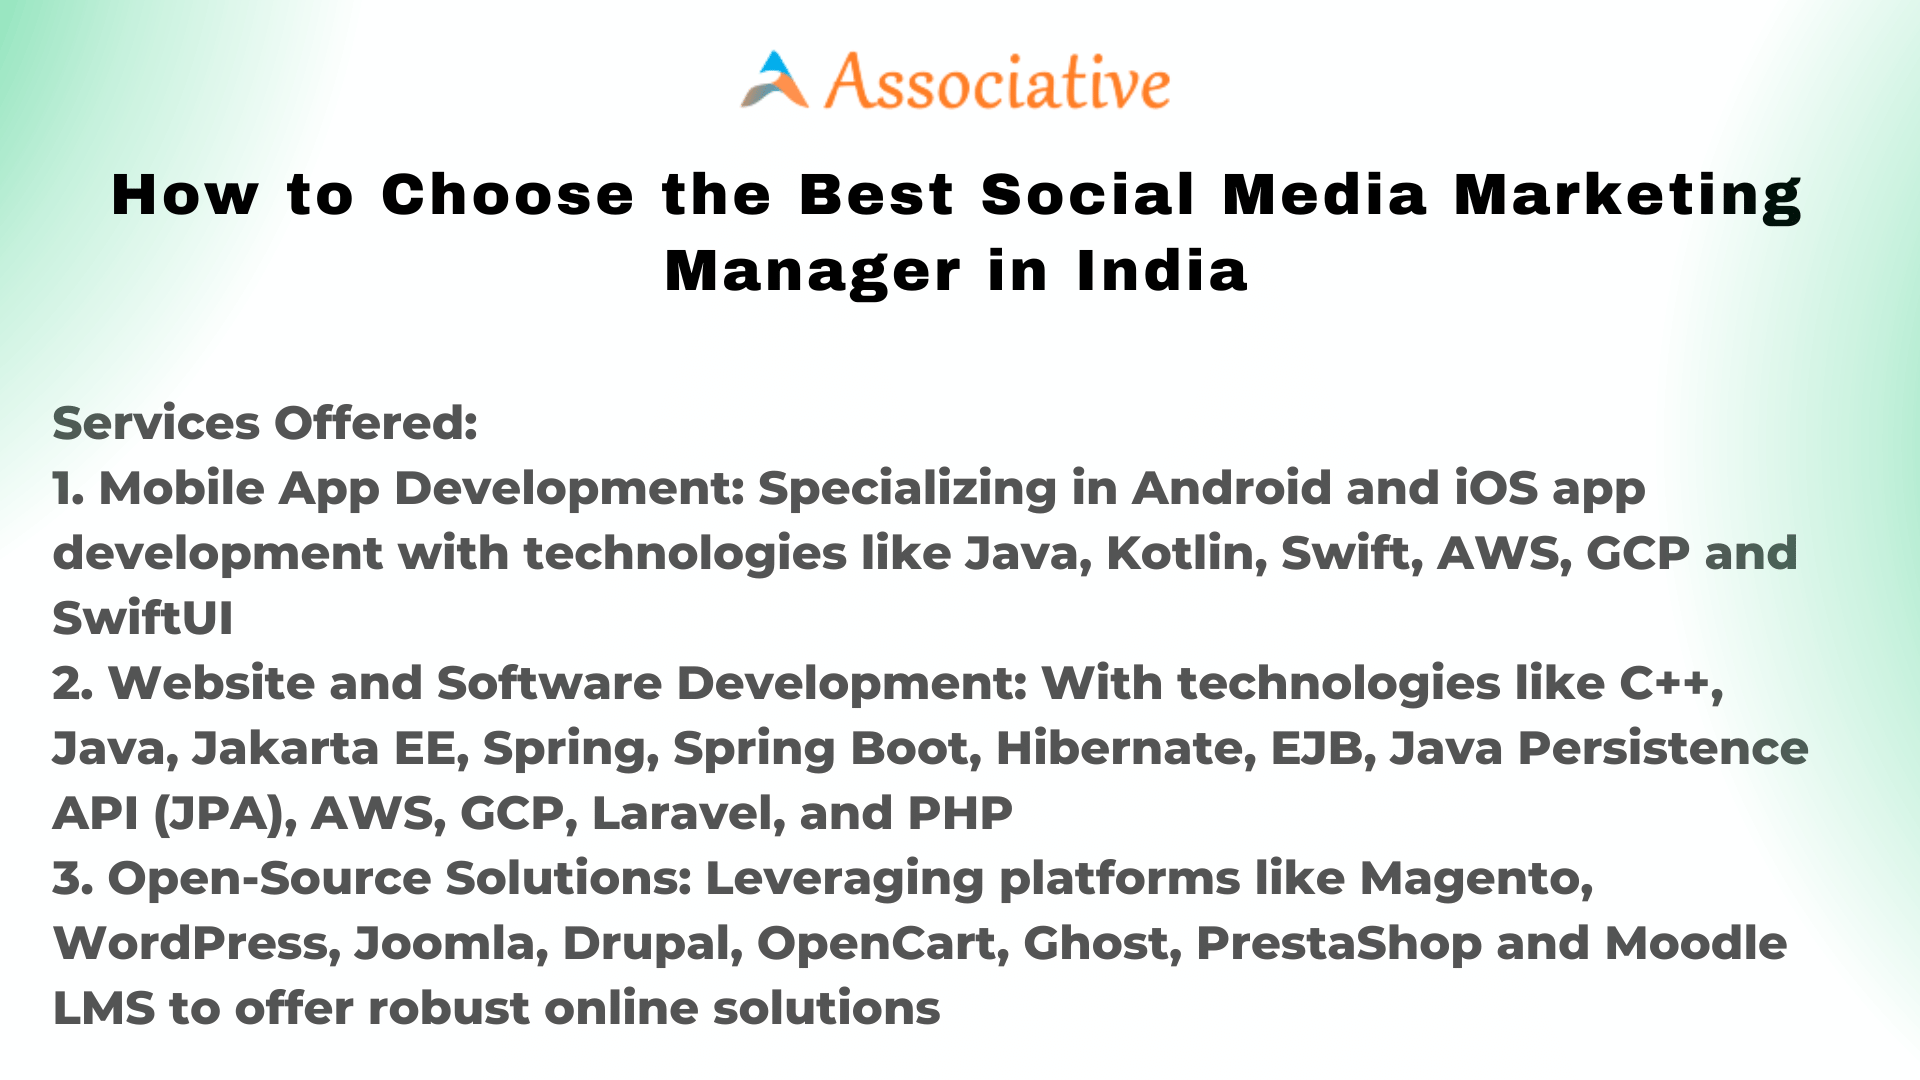 How to Choose the Best Social Media Marketing Manager in India